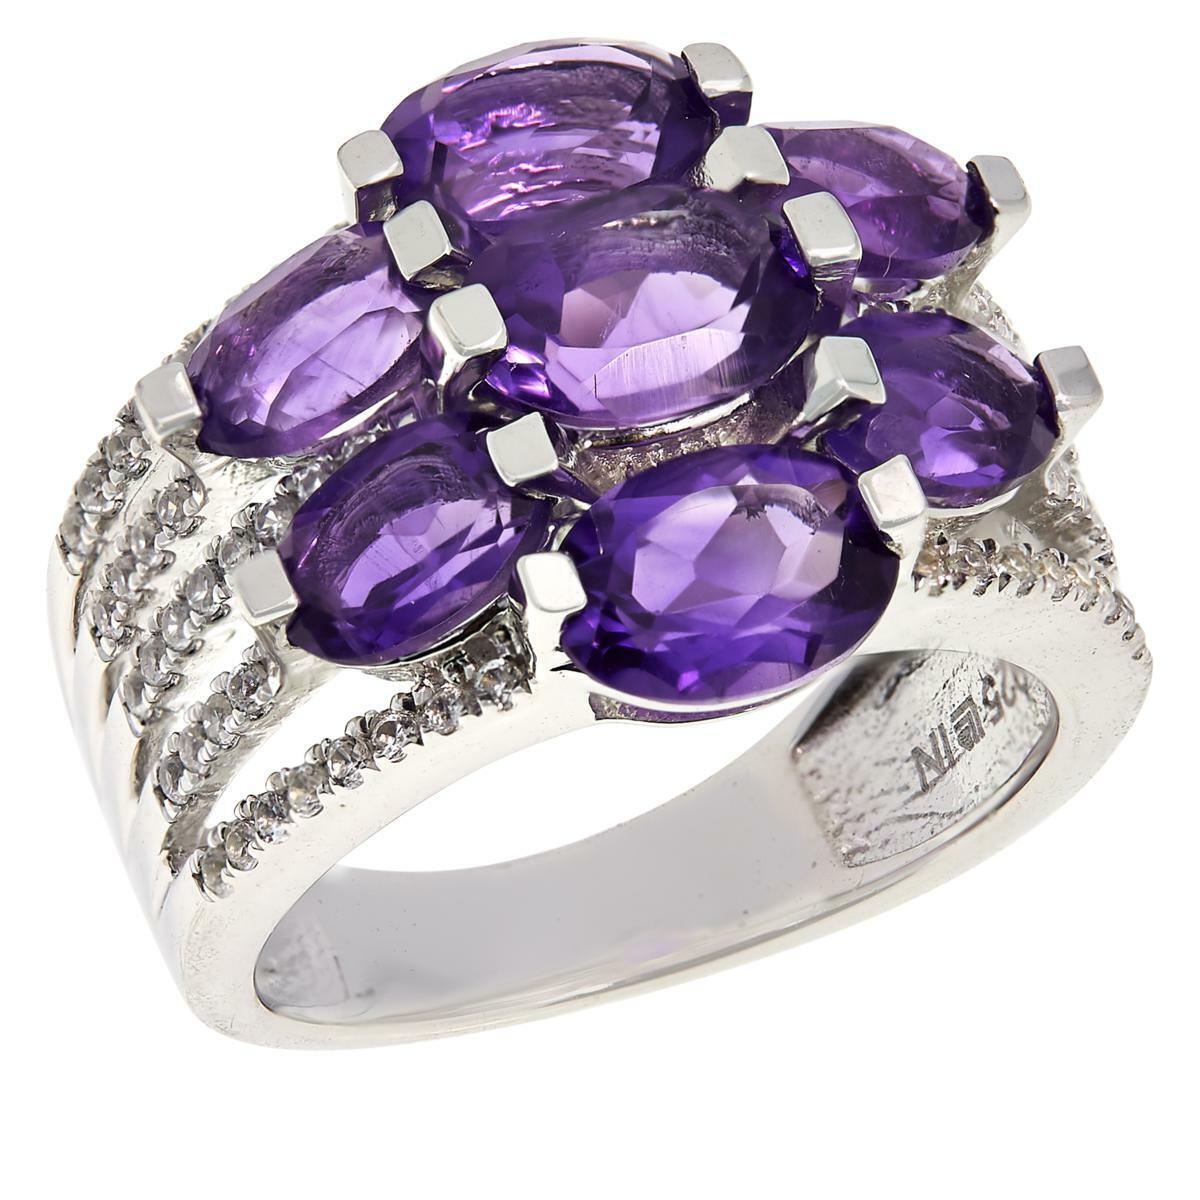 Colleen Lopez Oval Amethyst and White Zircon 7-Stone Ring, Size 7